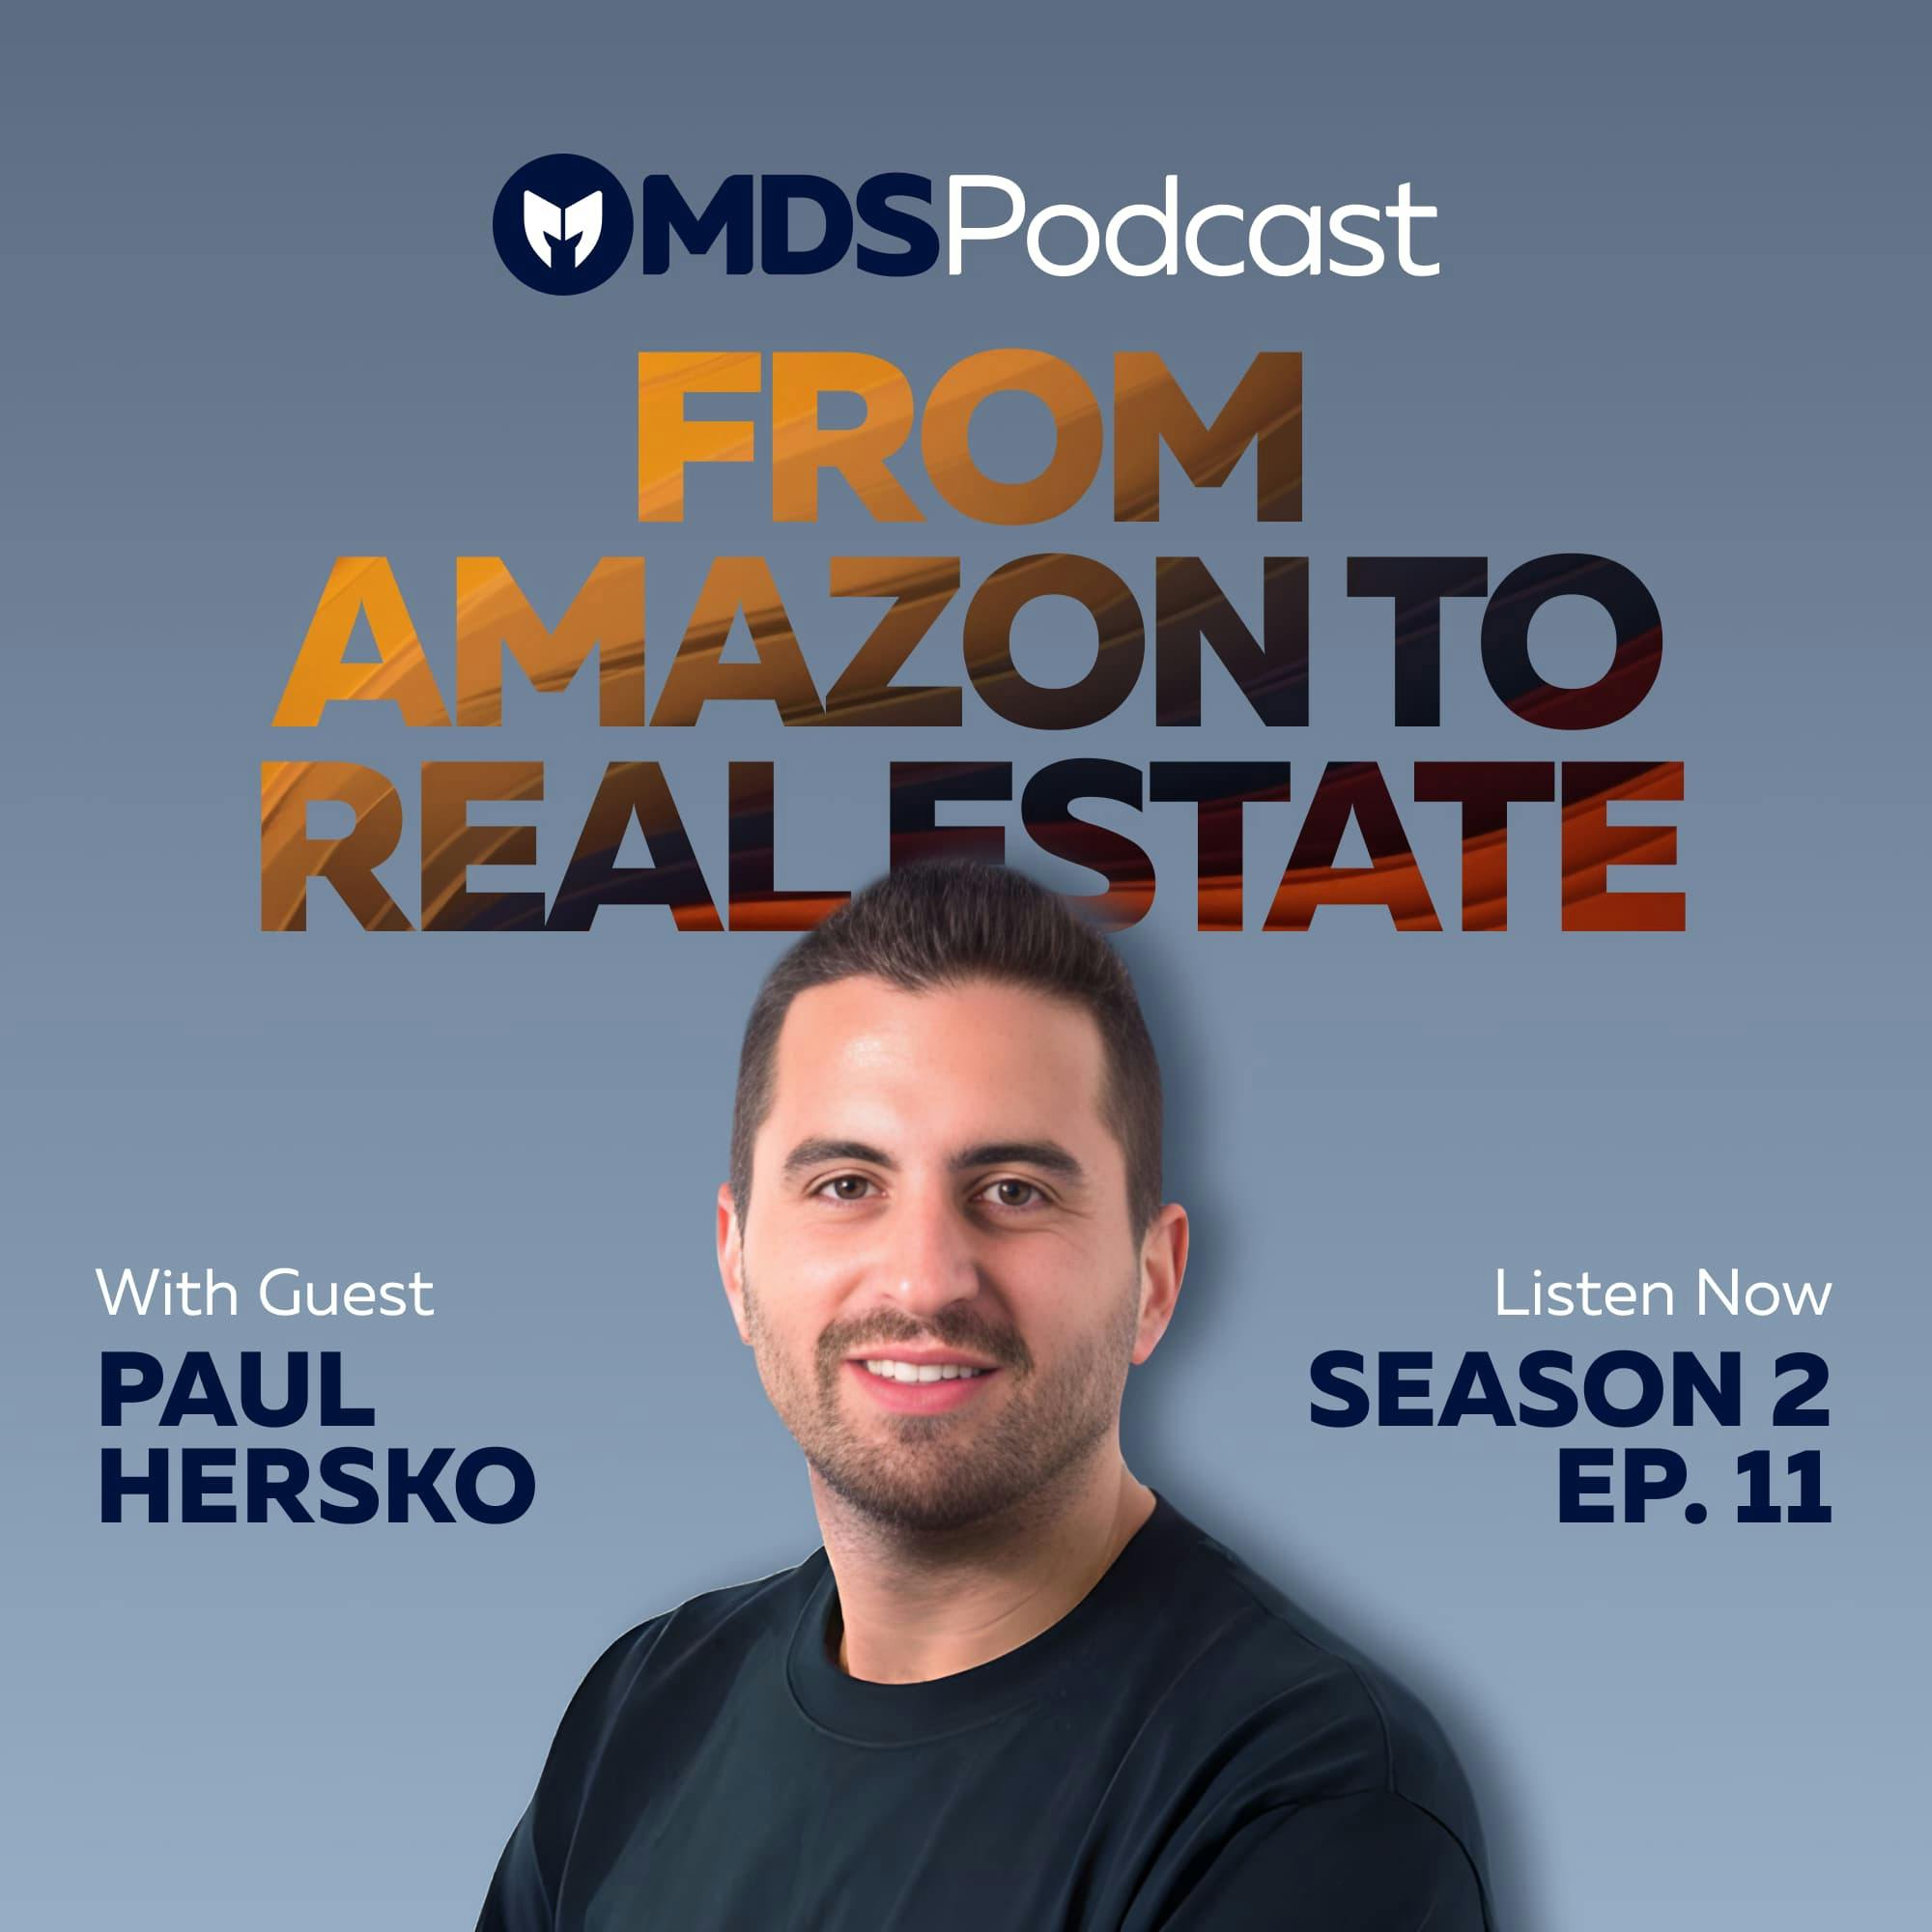 Paul Hersko: Bridging E-commerce and Real Estate – Lessons in Business Transition